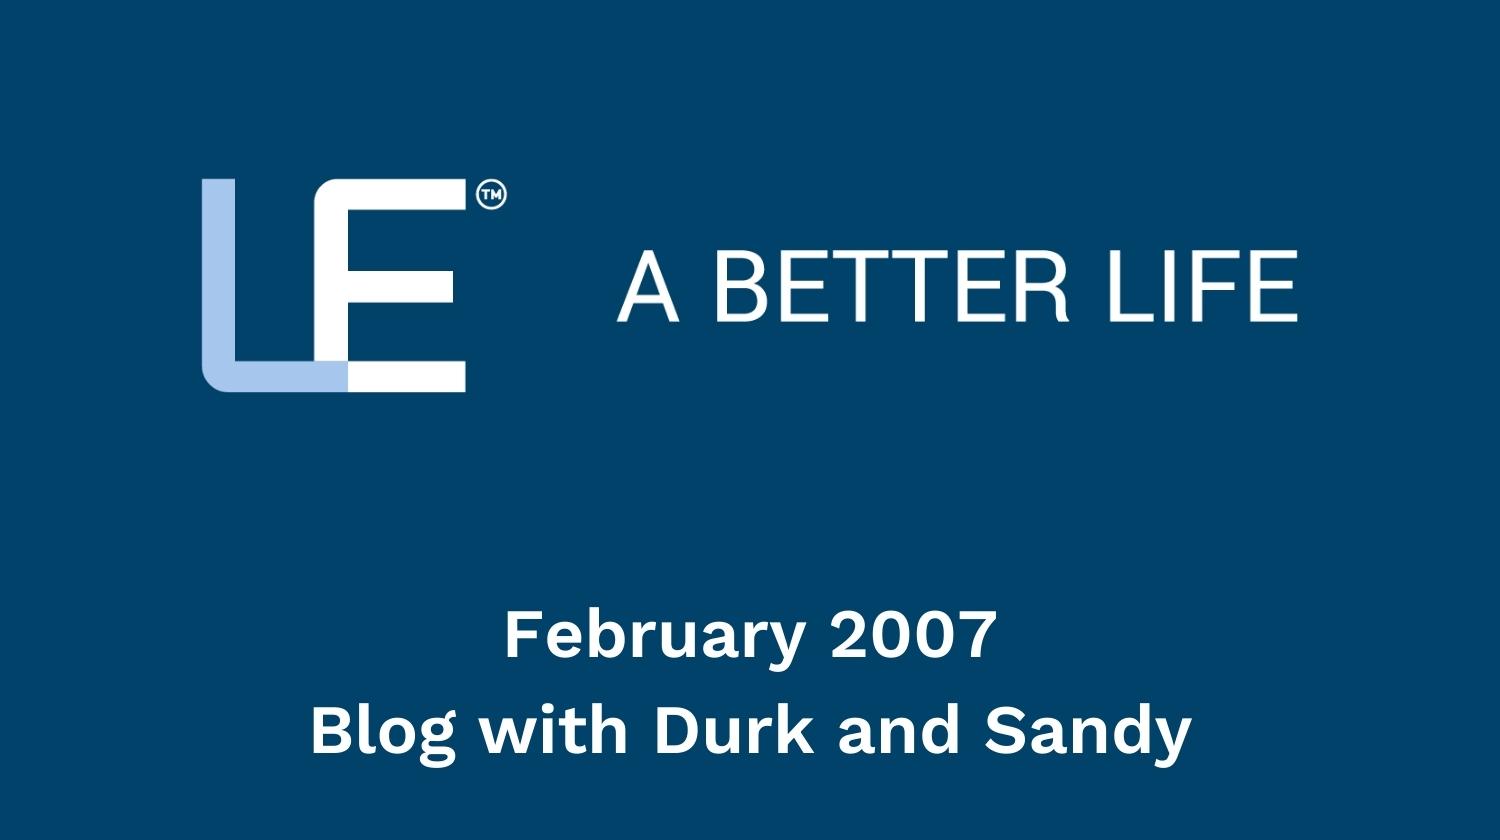 February 2007 Blog with Durk and Sandy